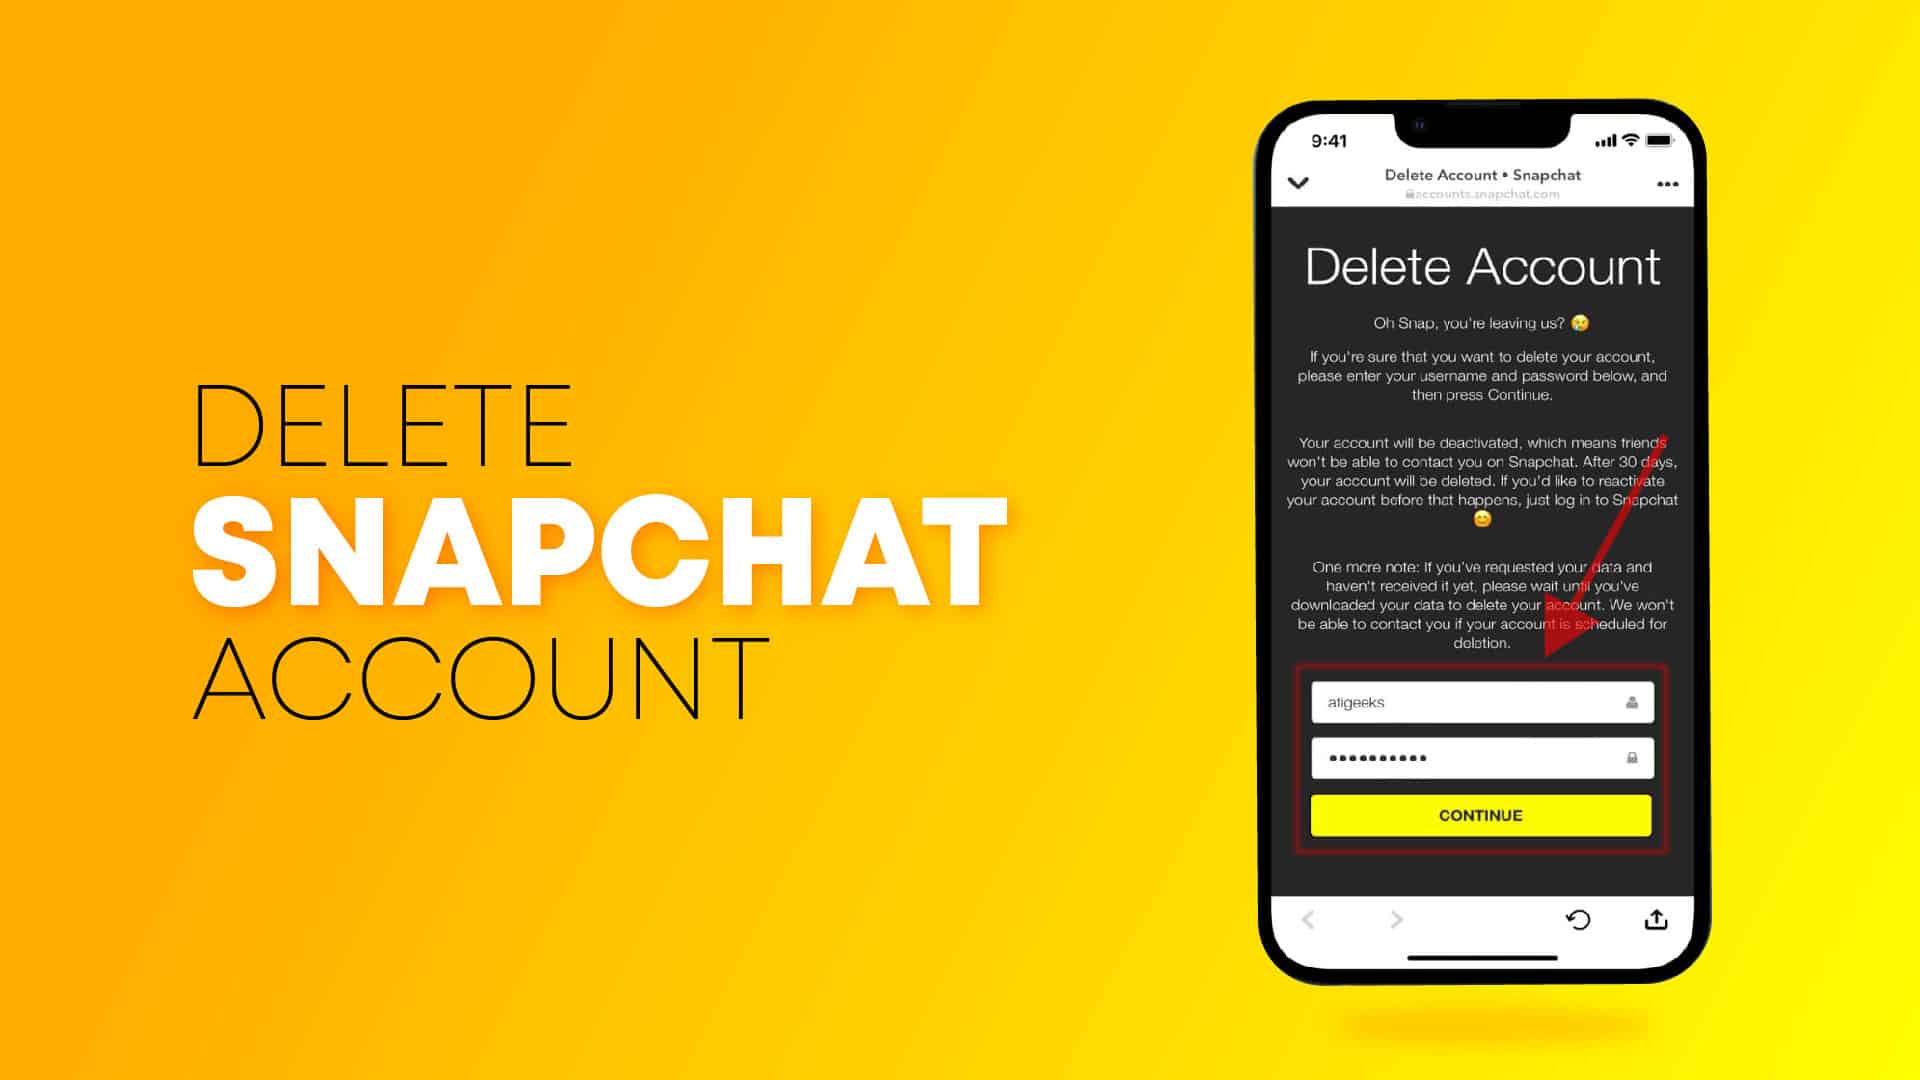 How to delete a Snapchat account